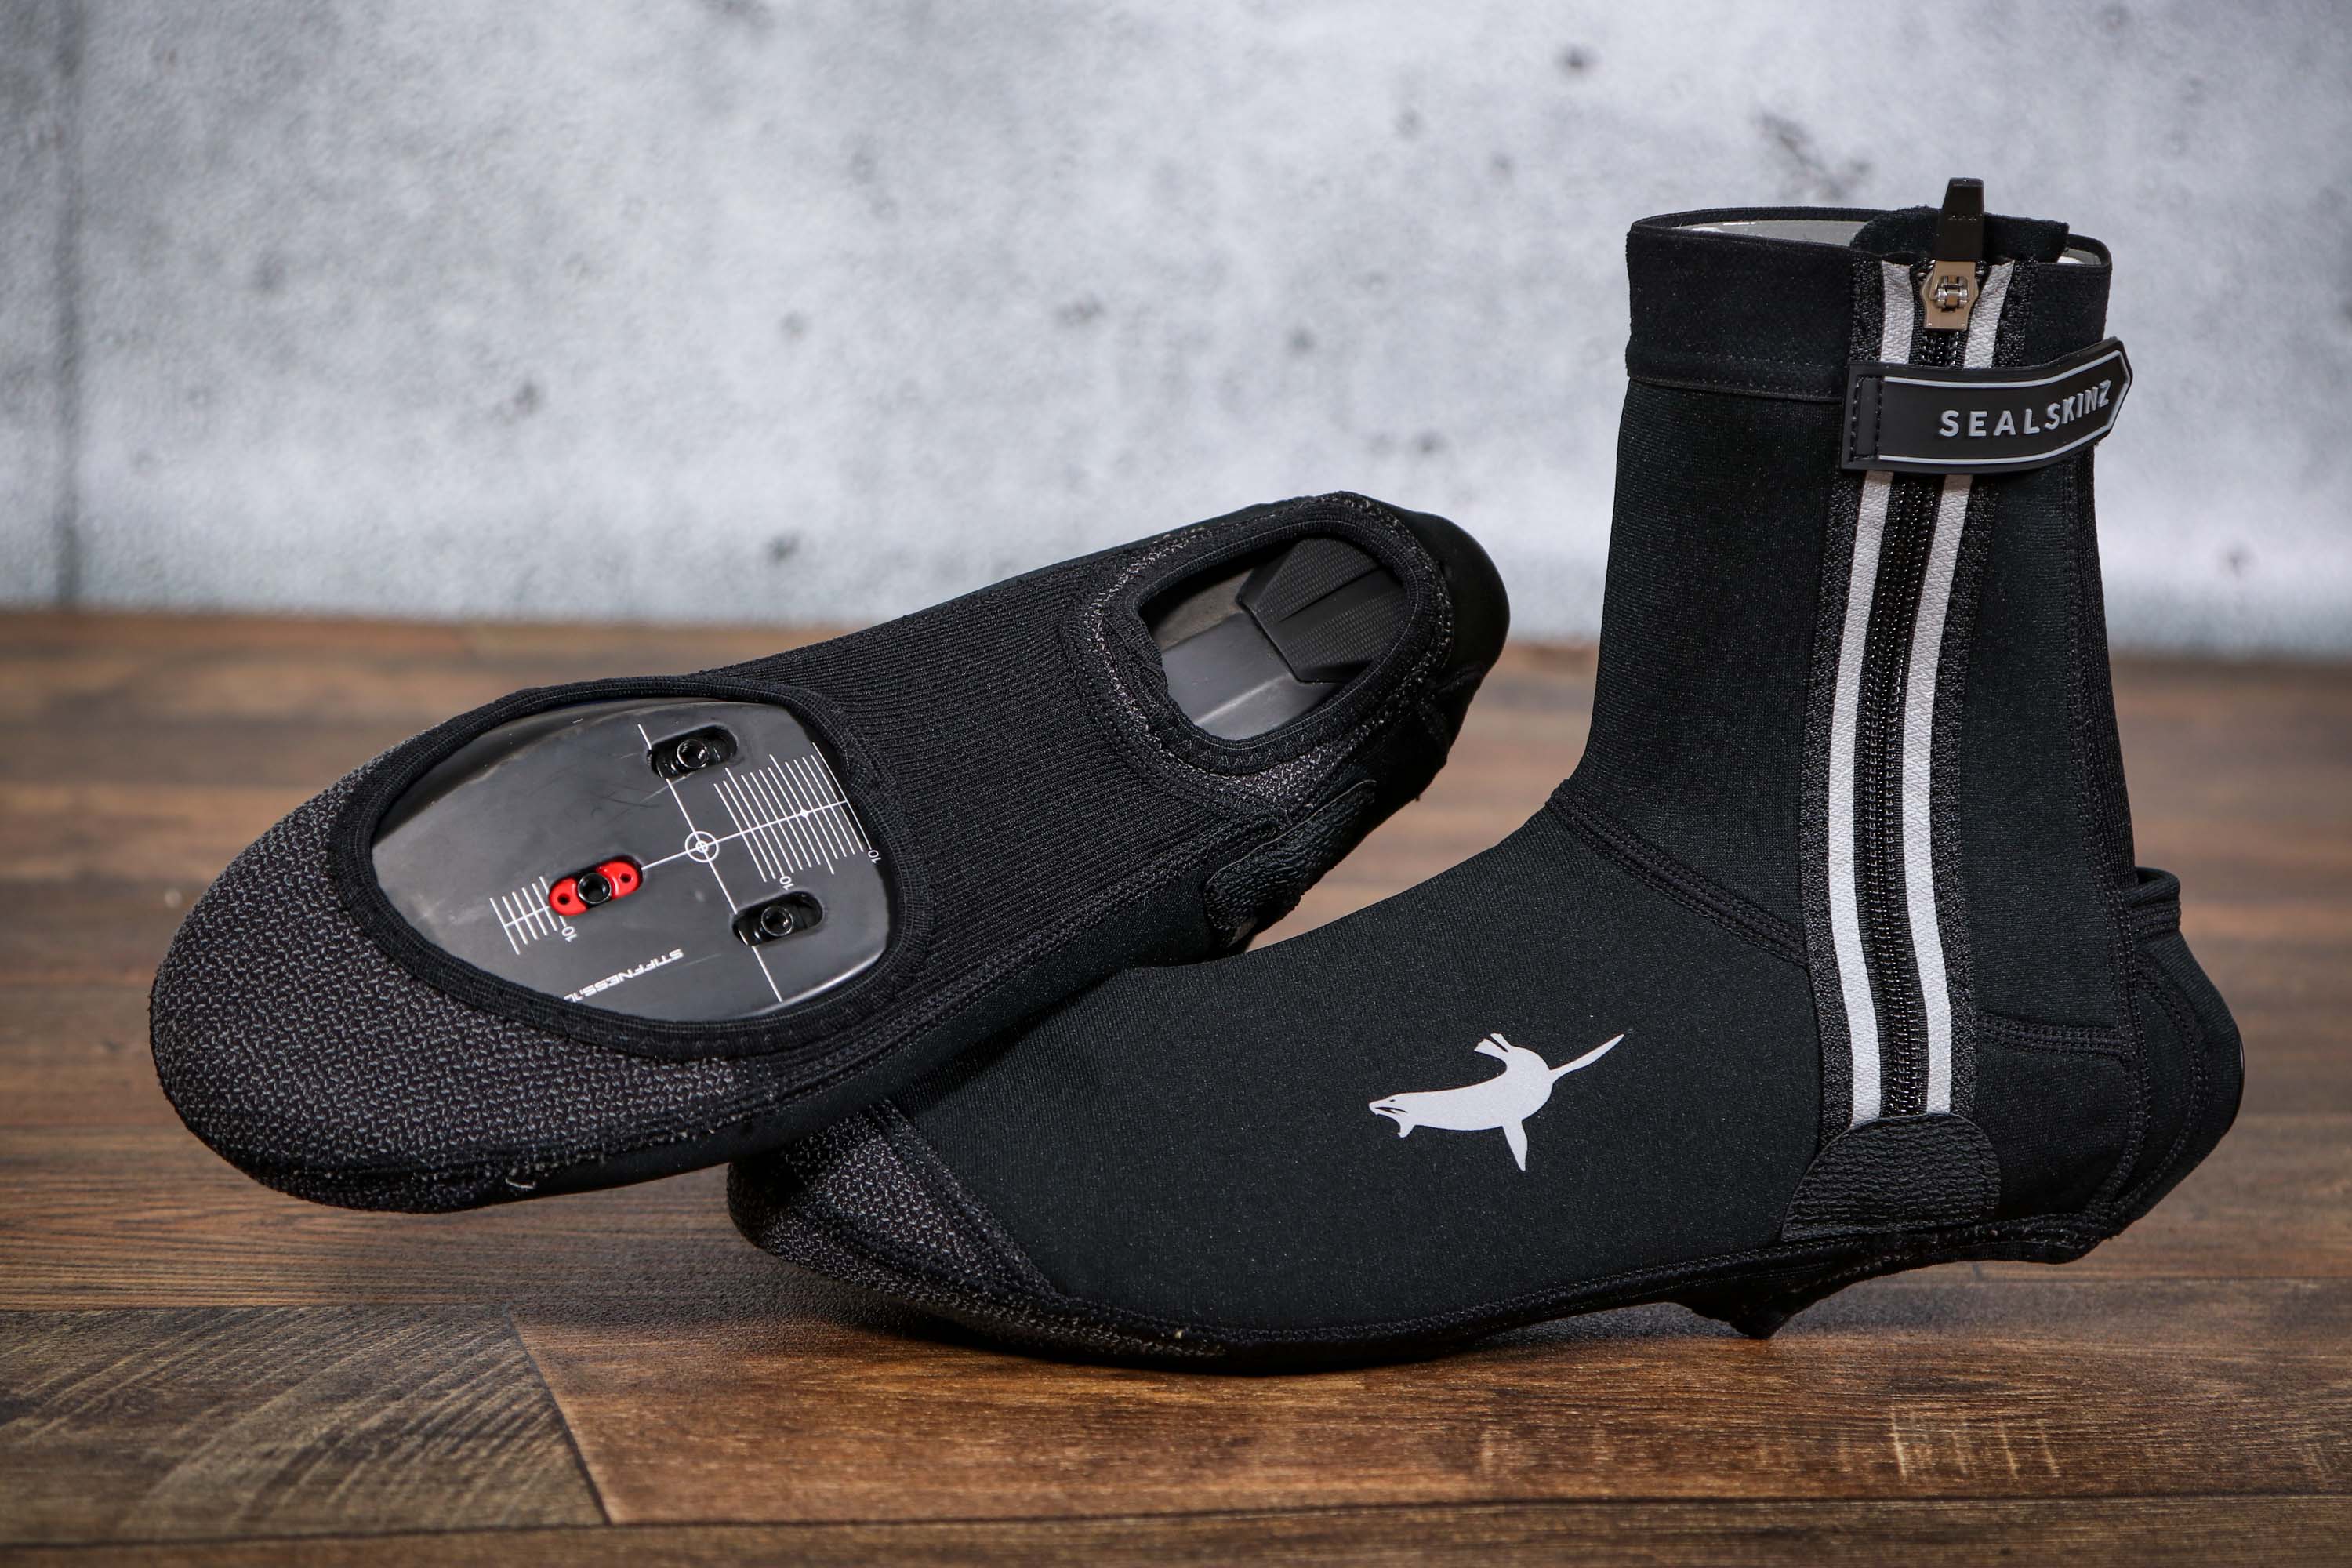 mtb overshoes for flat pedals